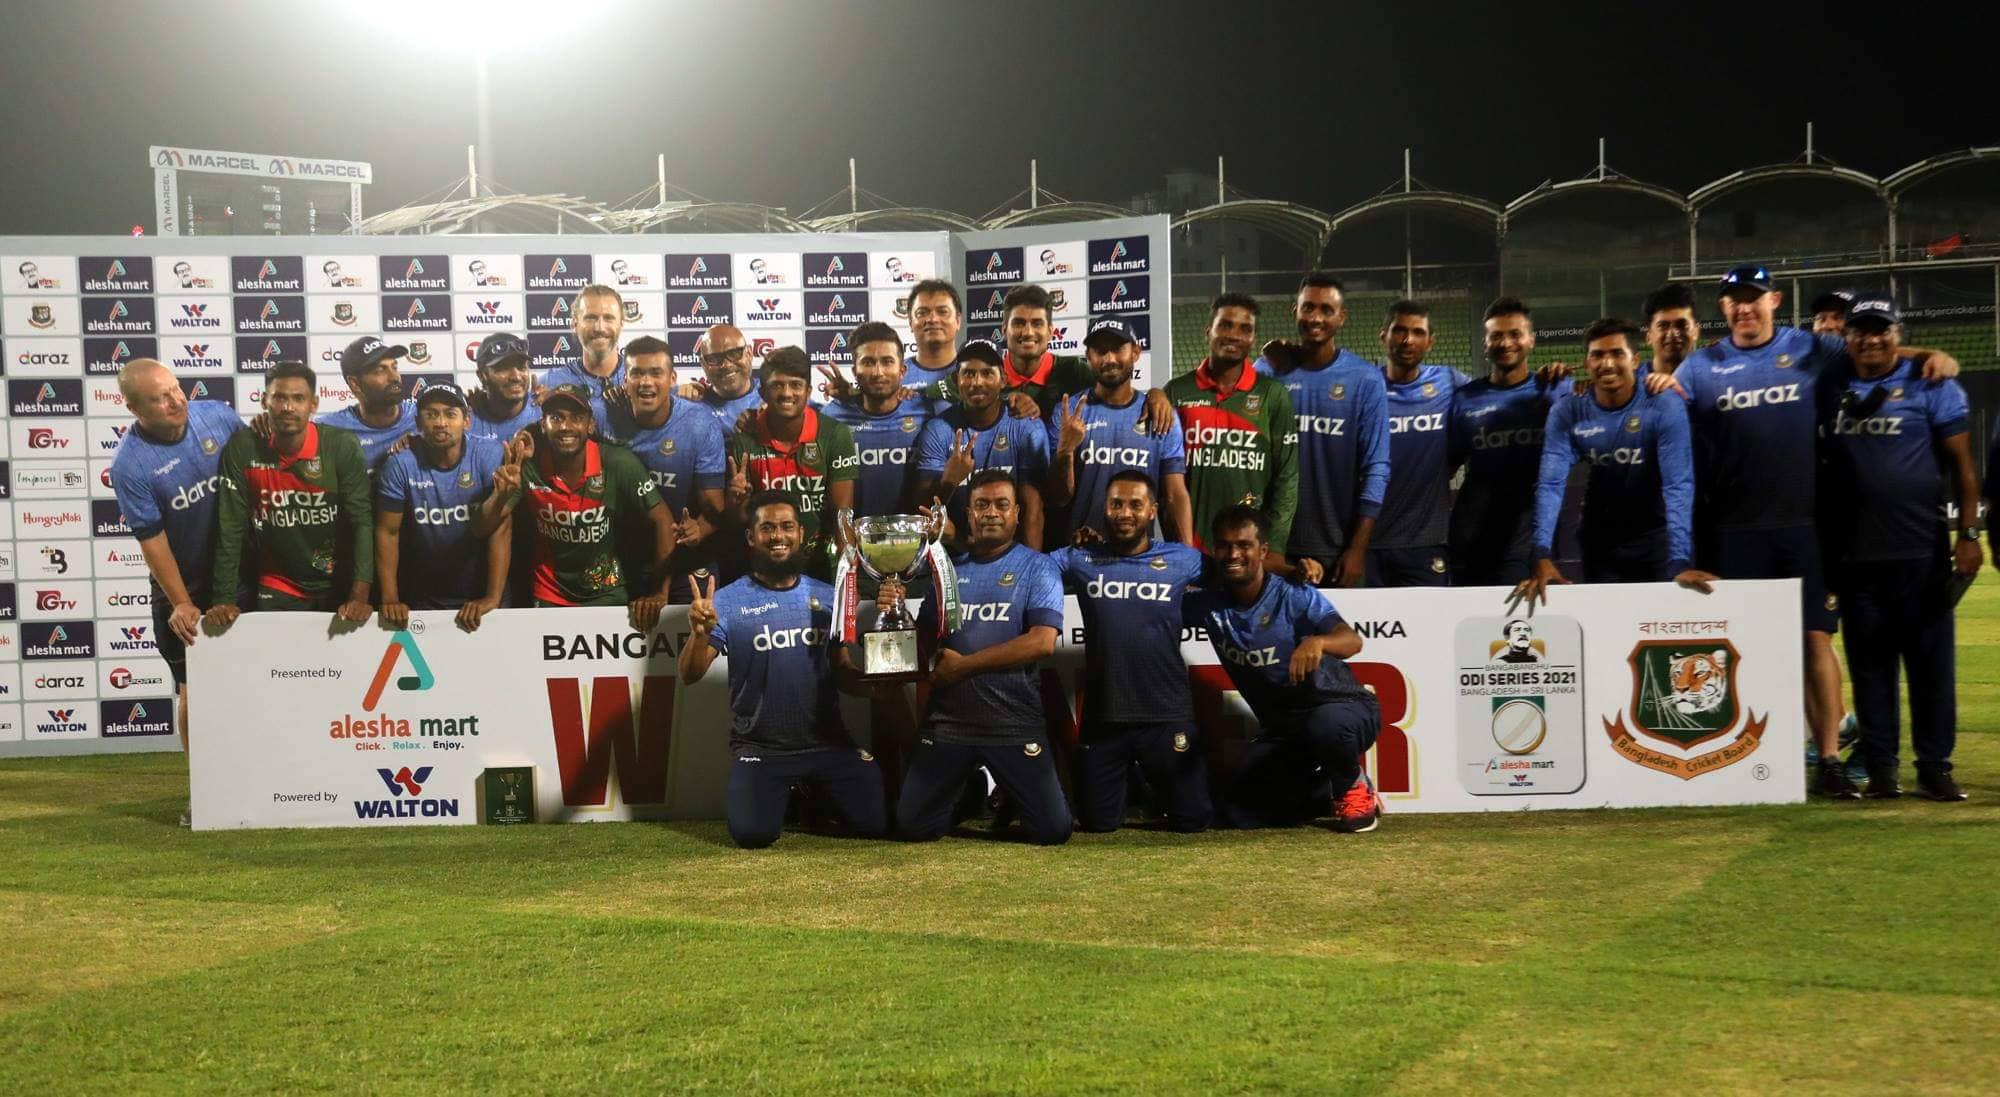 Celebration moment of Bangladesh squad with the trophy